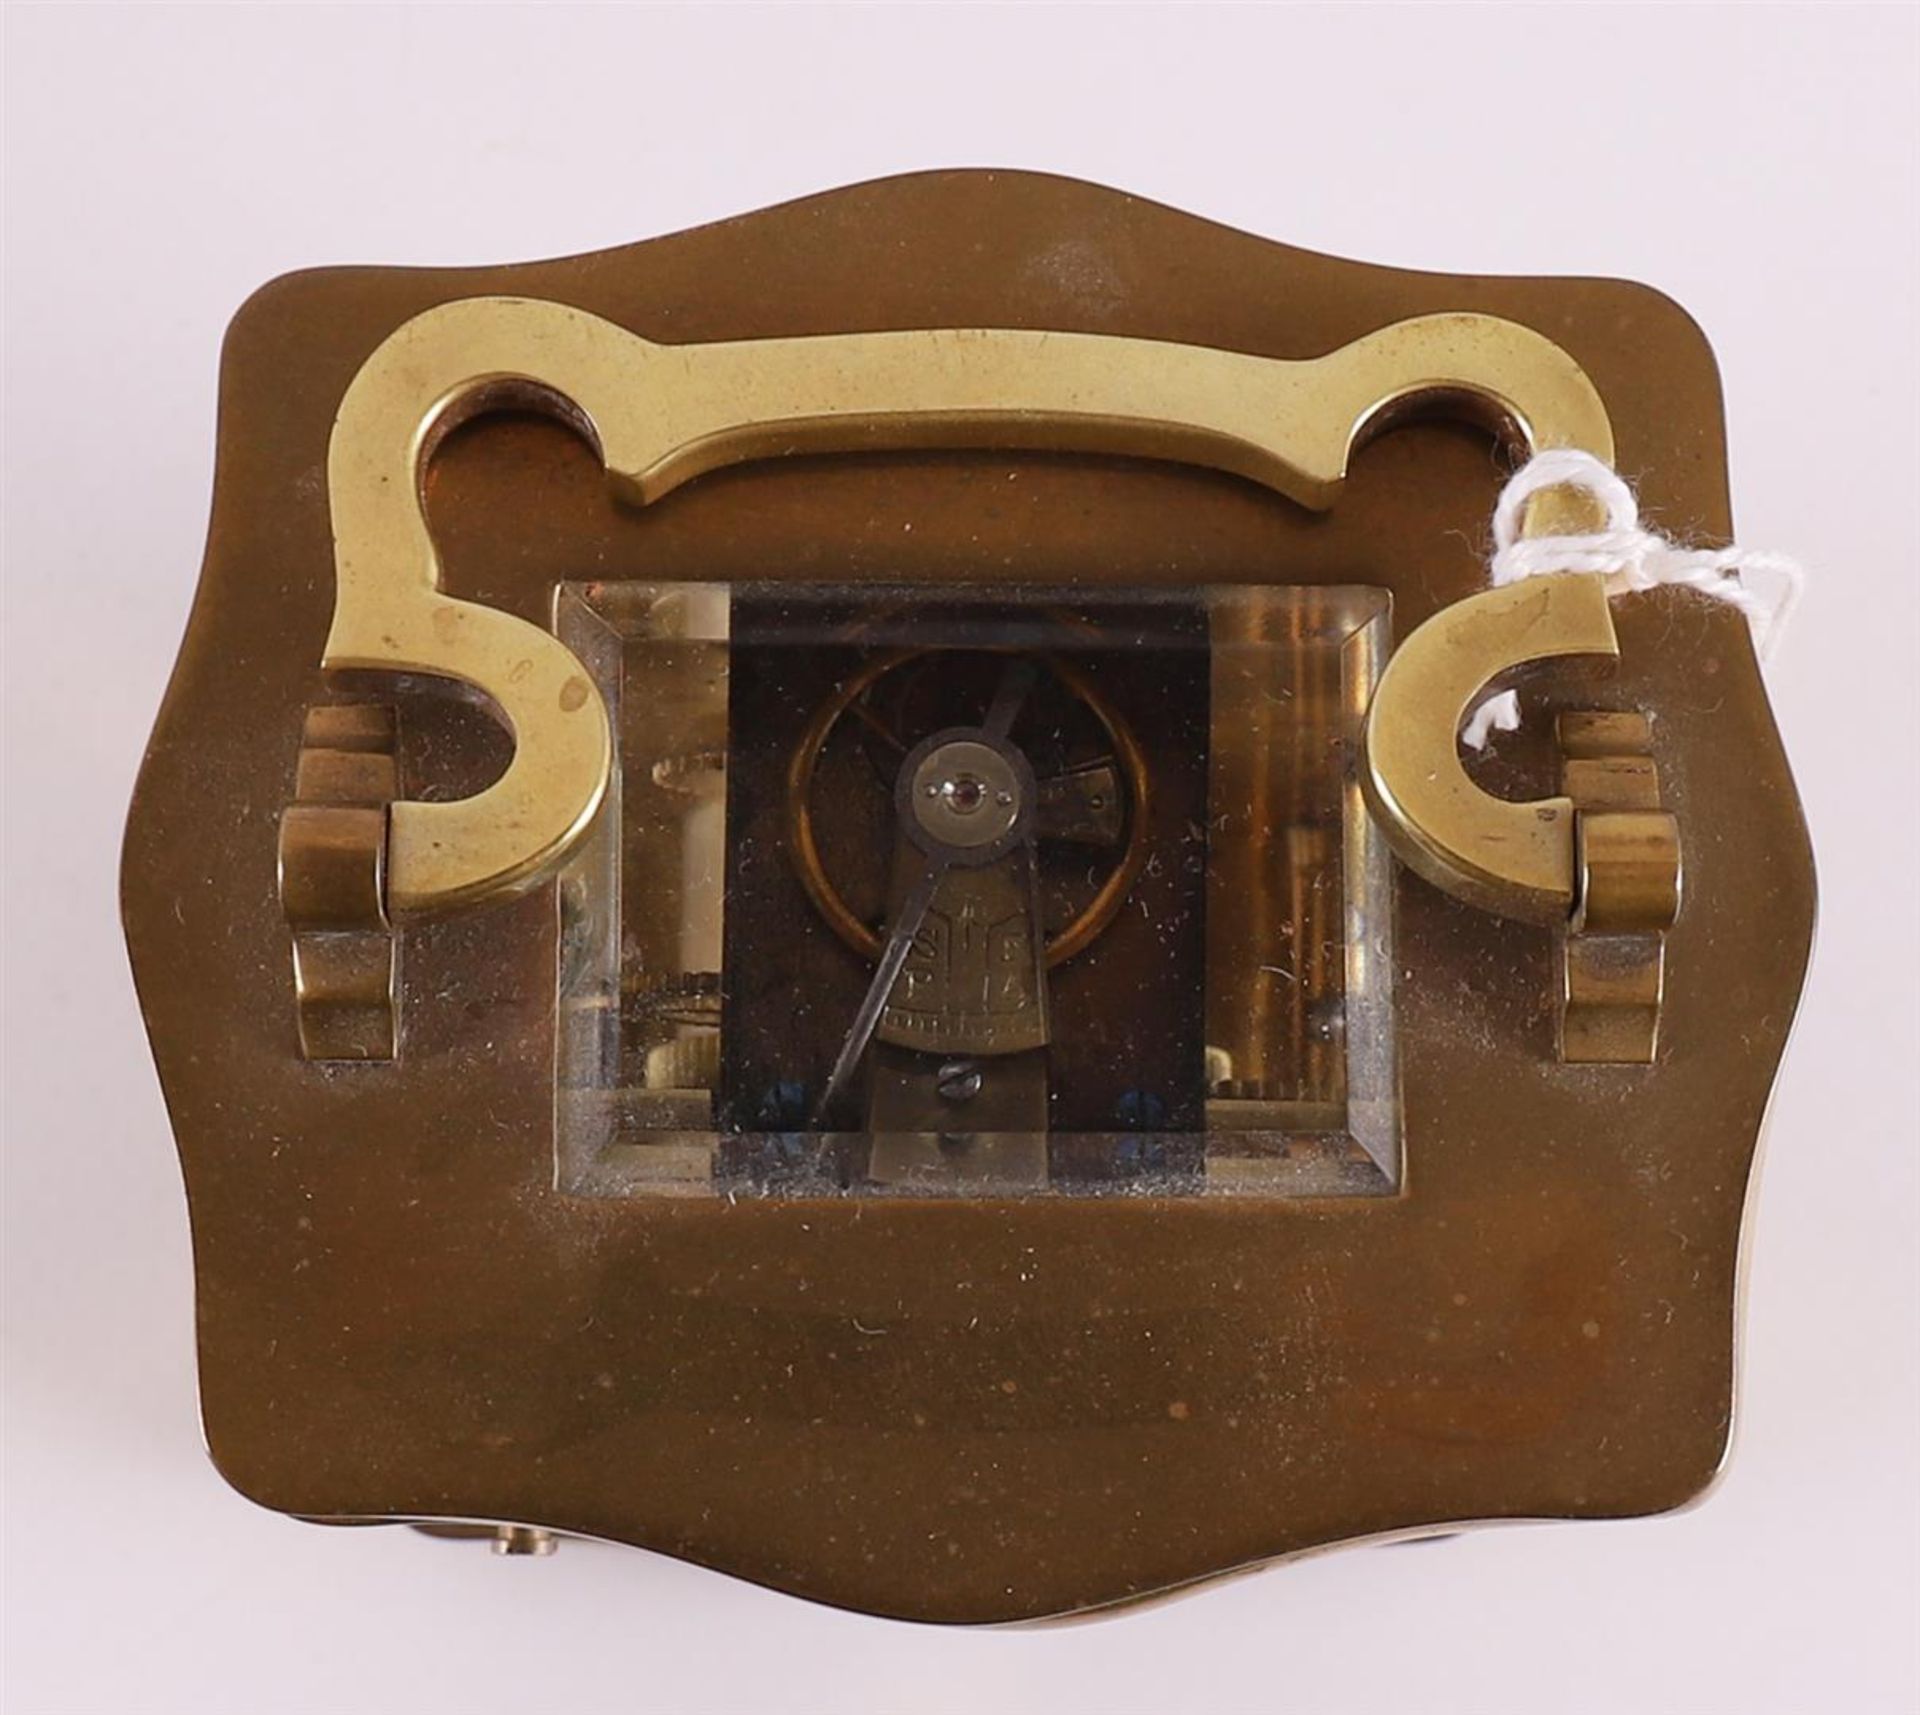 A travel clock in brass housing and original case, France, - Image 8 of 8